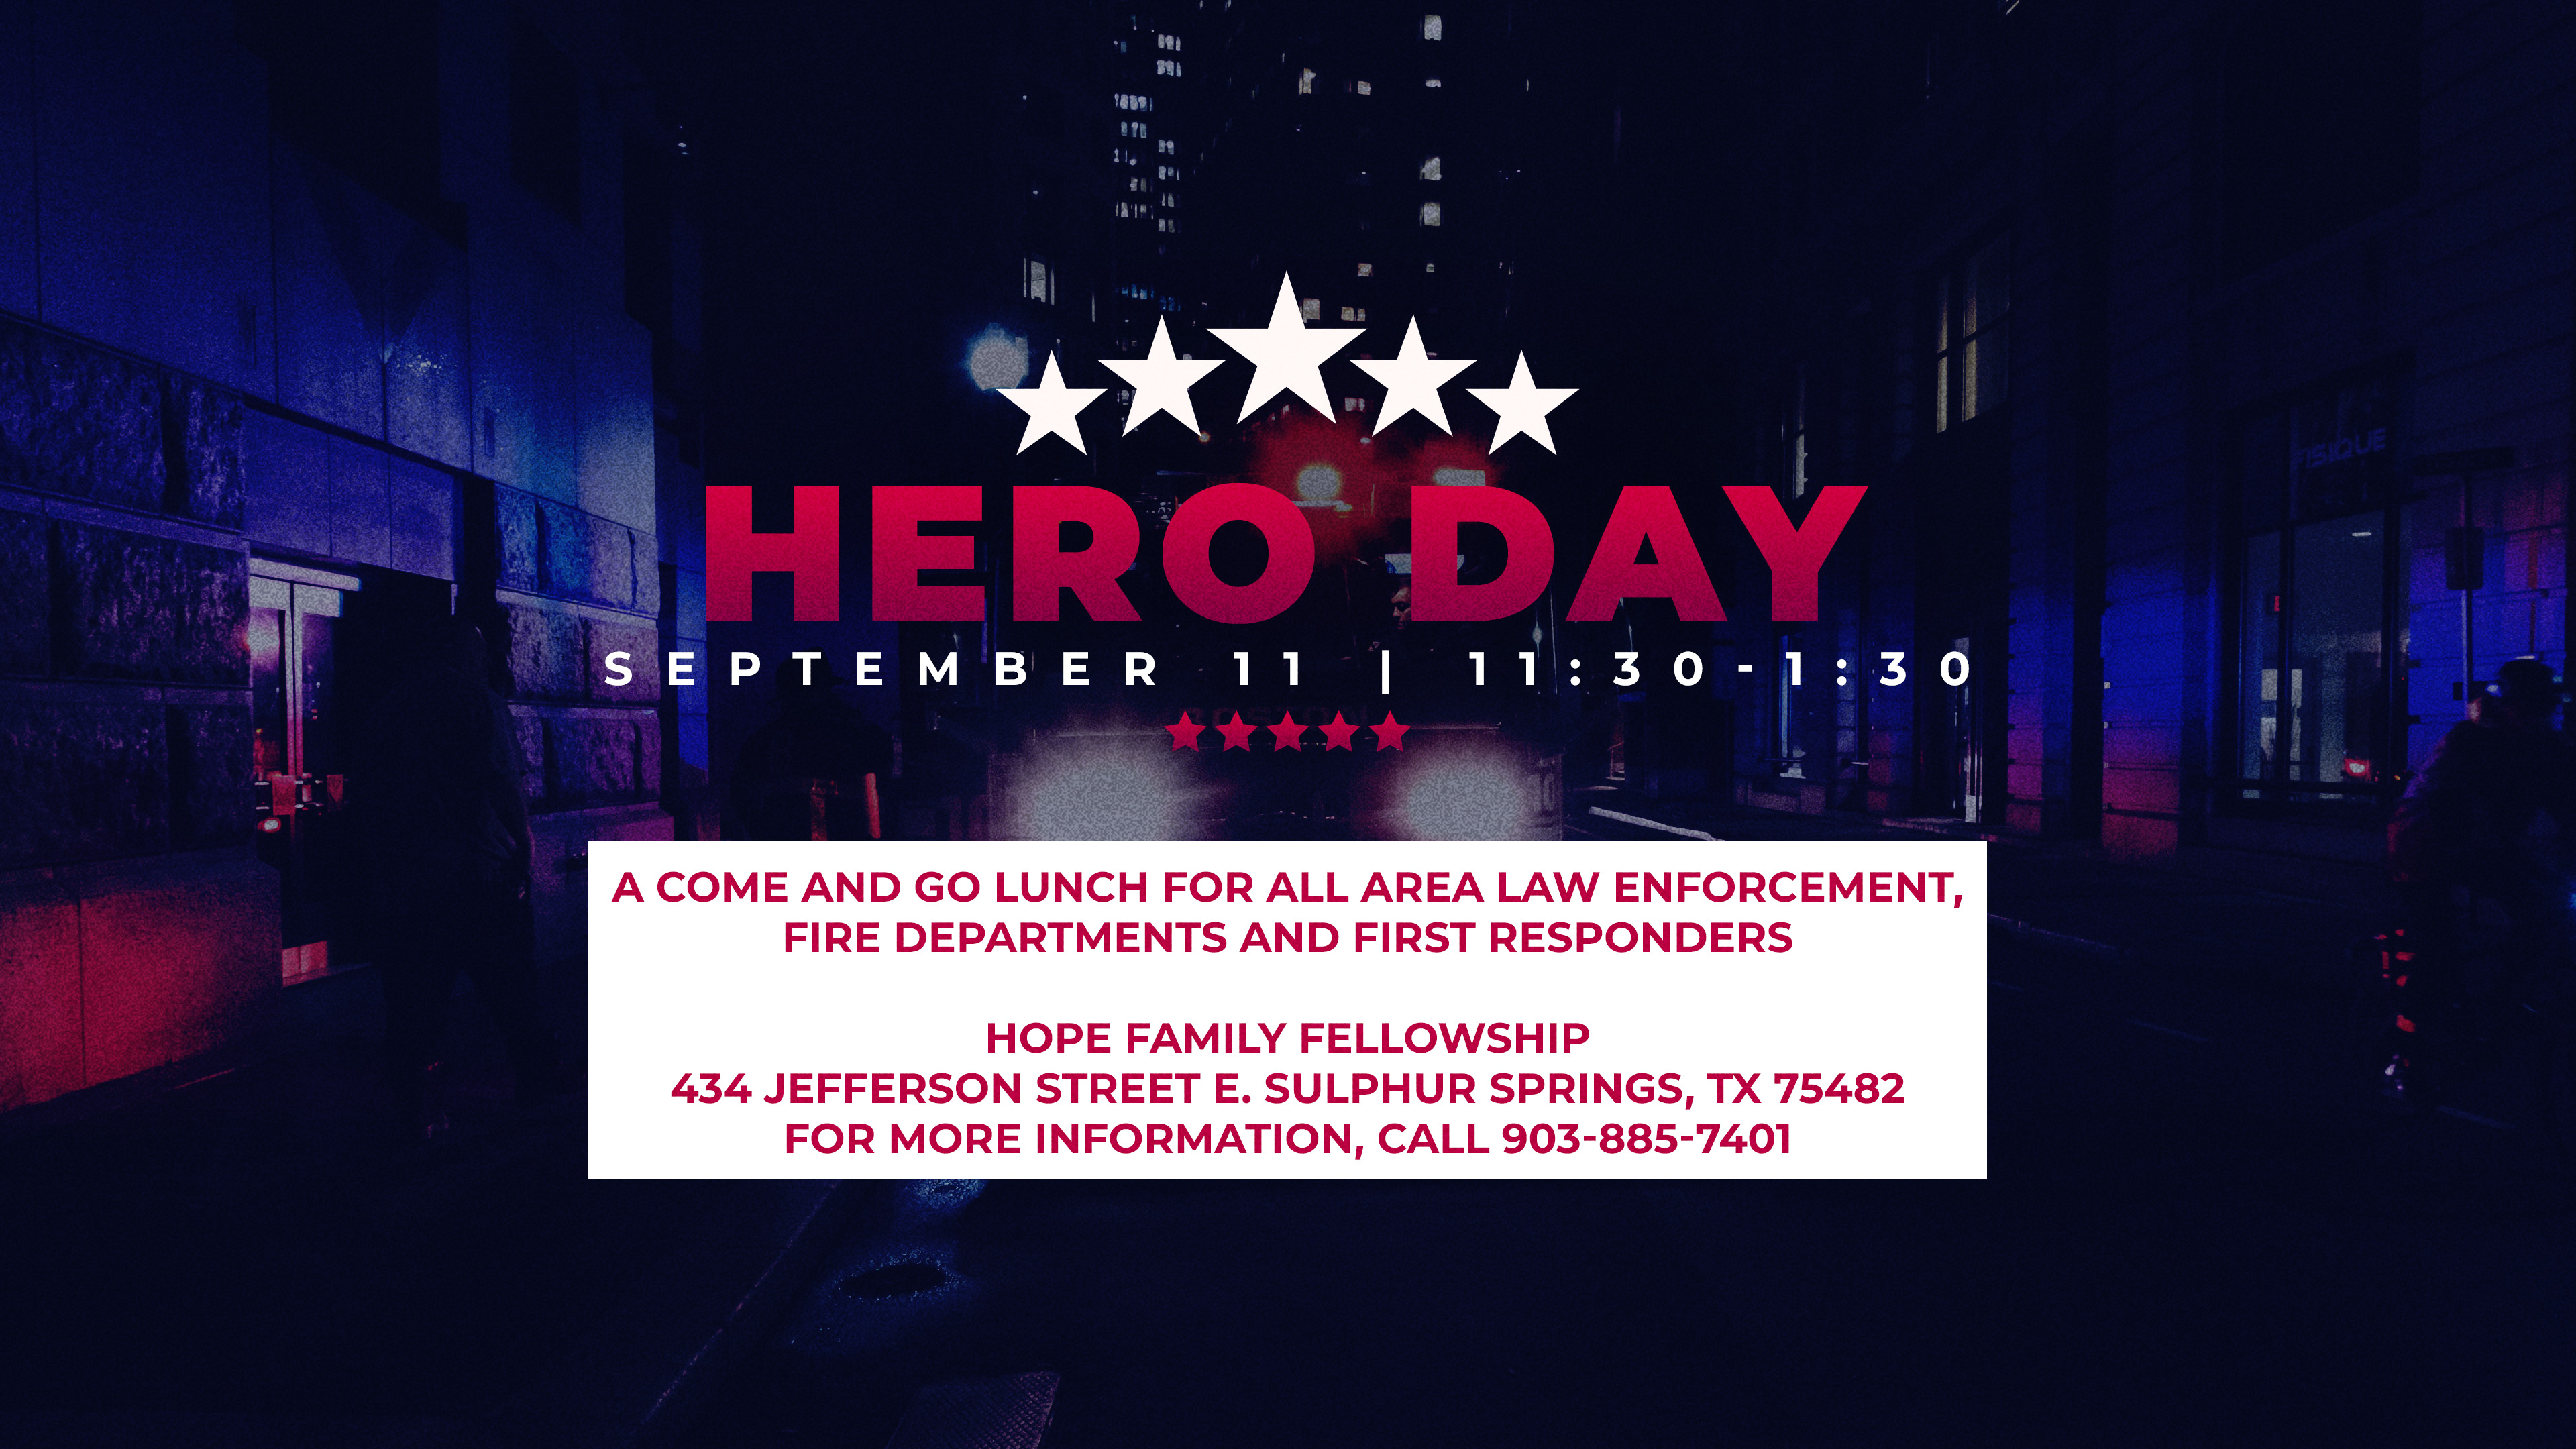 Hope Family Fellowship to Host Hero Day for Local First Responders on September 11th